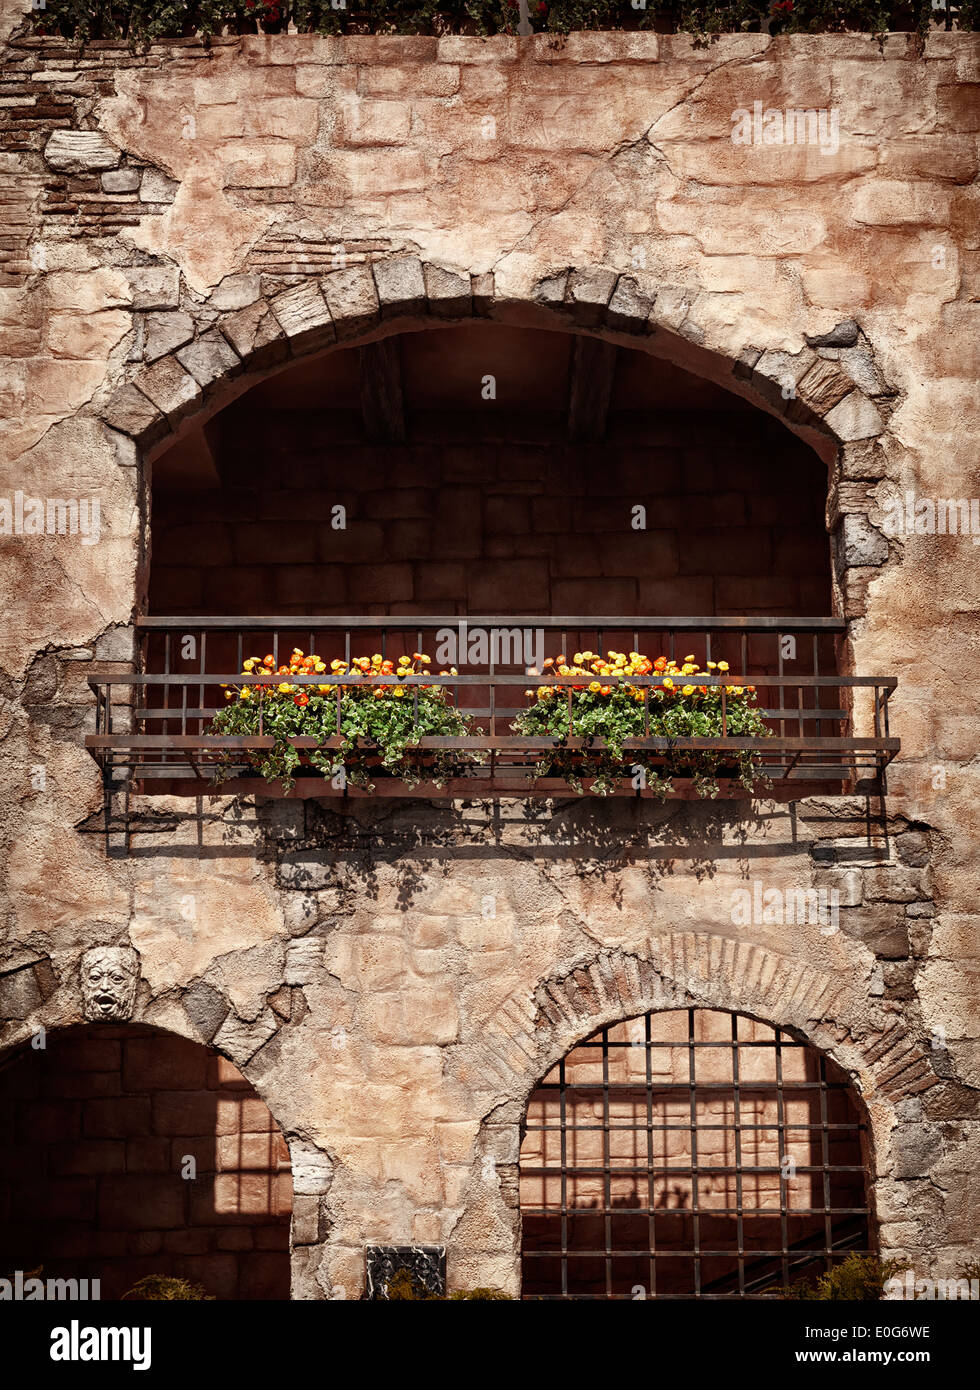 Wall of an old rustic house with flowers under a balcony, antique architecture in Venetian style Stock Photo